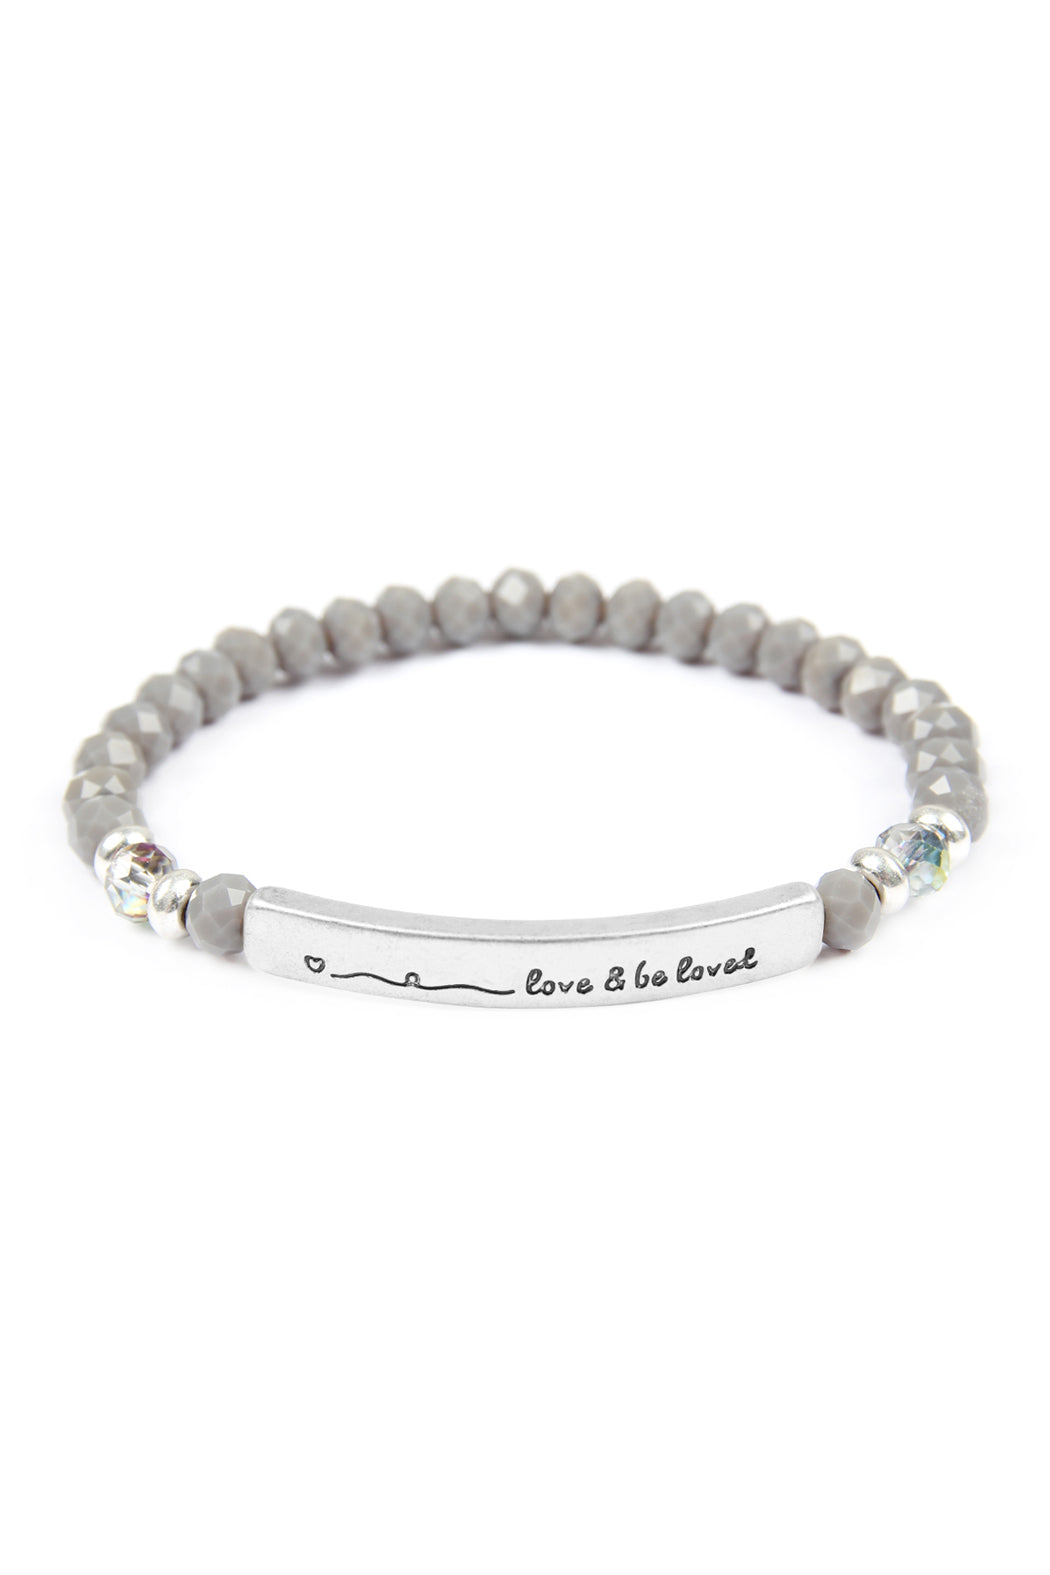 LOVE AND BE LOVED 6MM GLASS BEADS STRETCH BRACELET